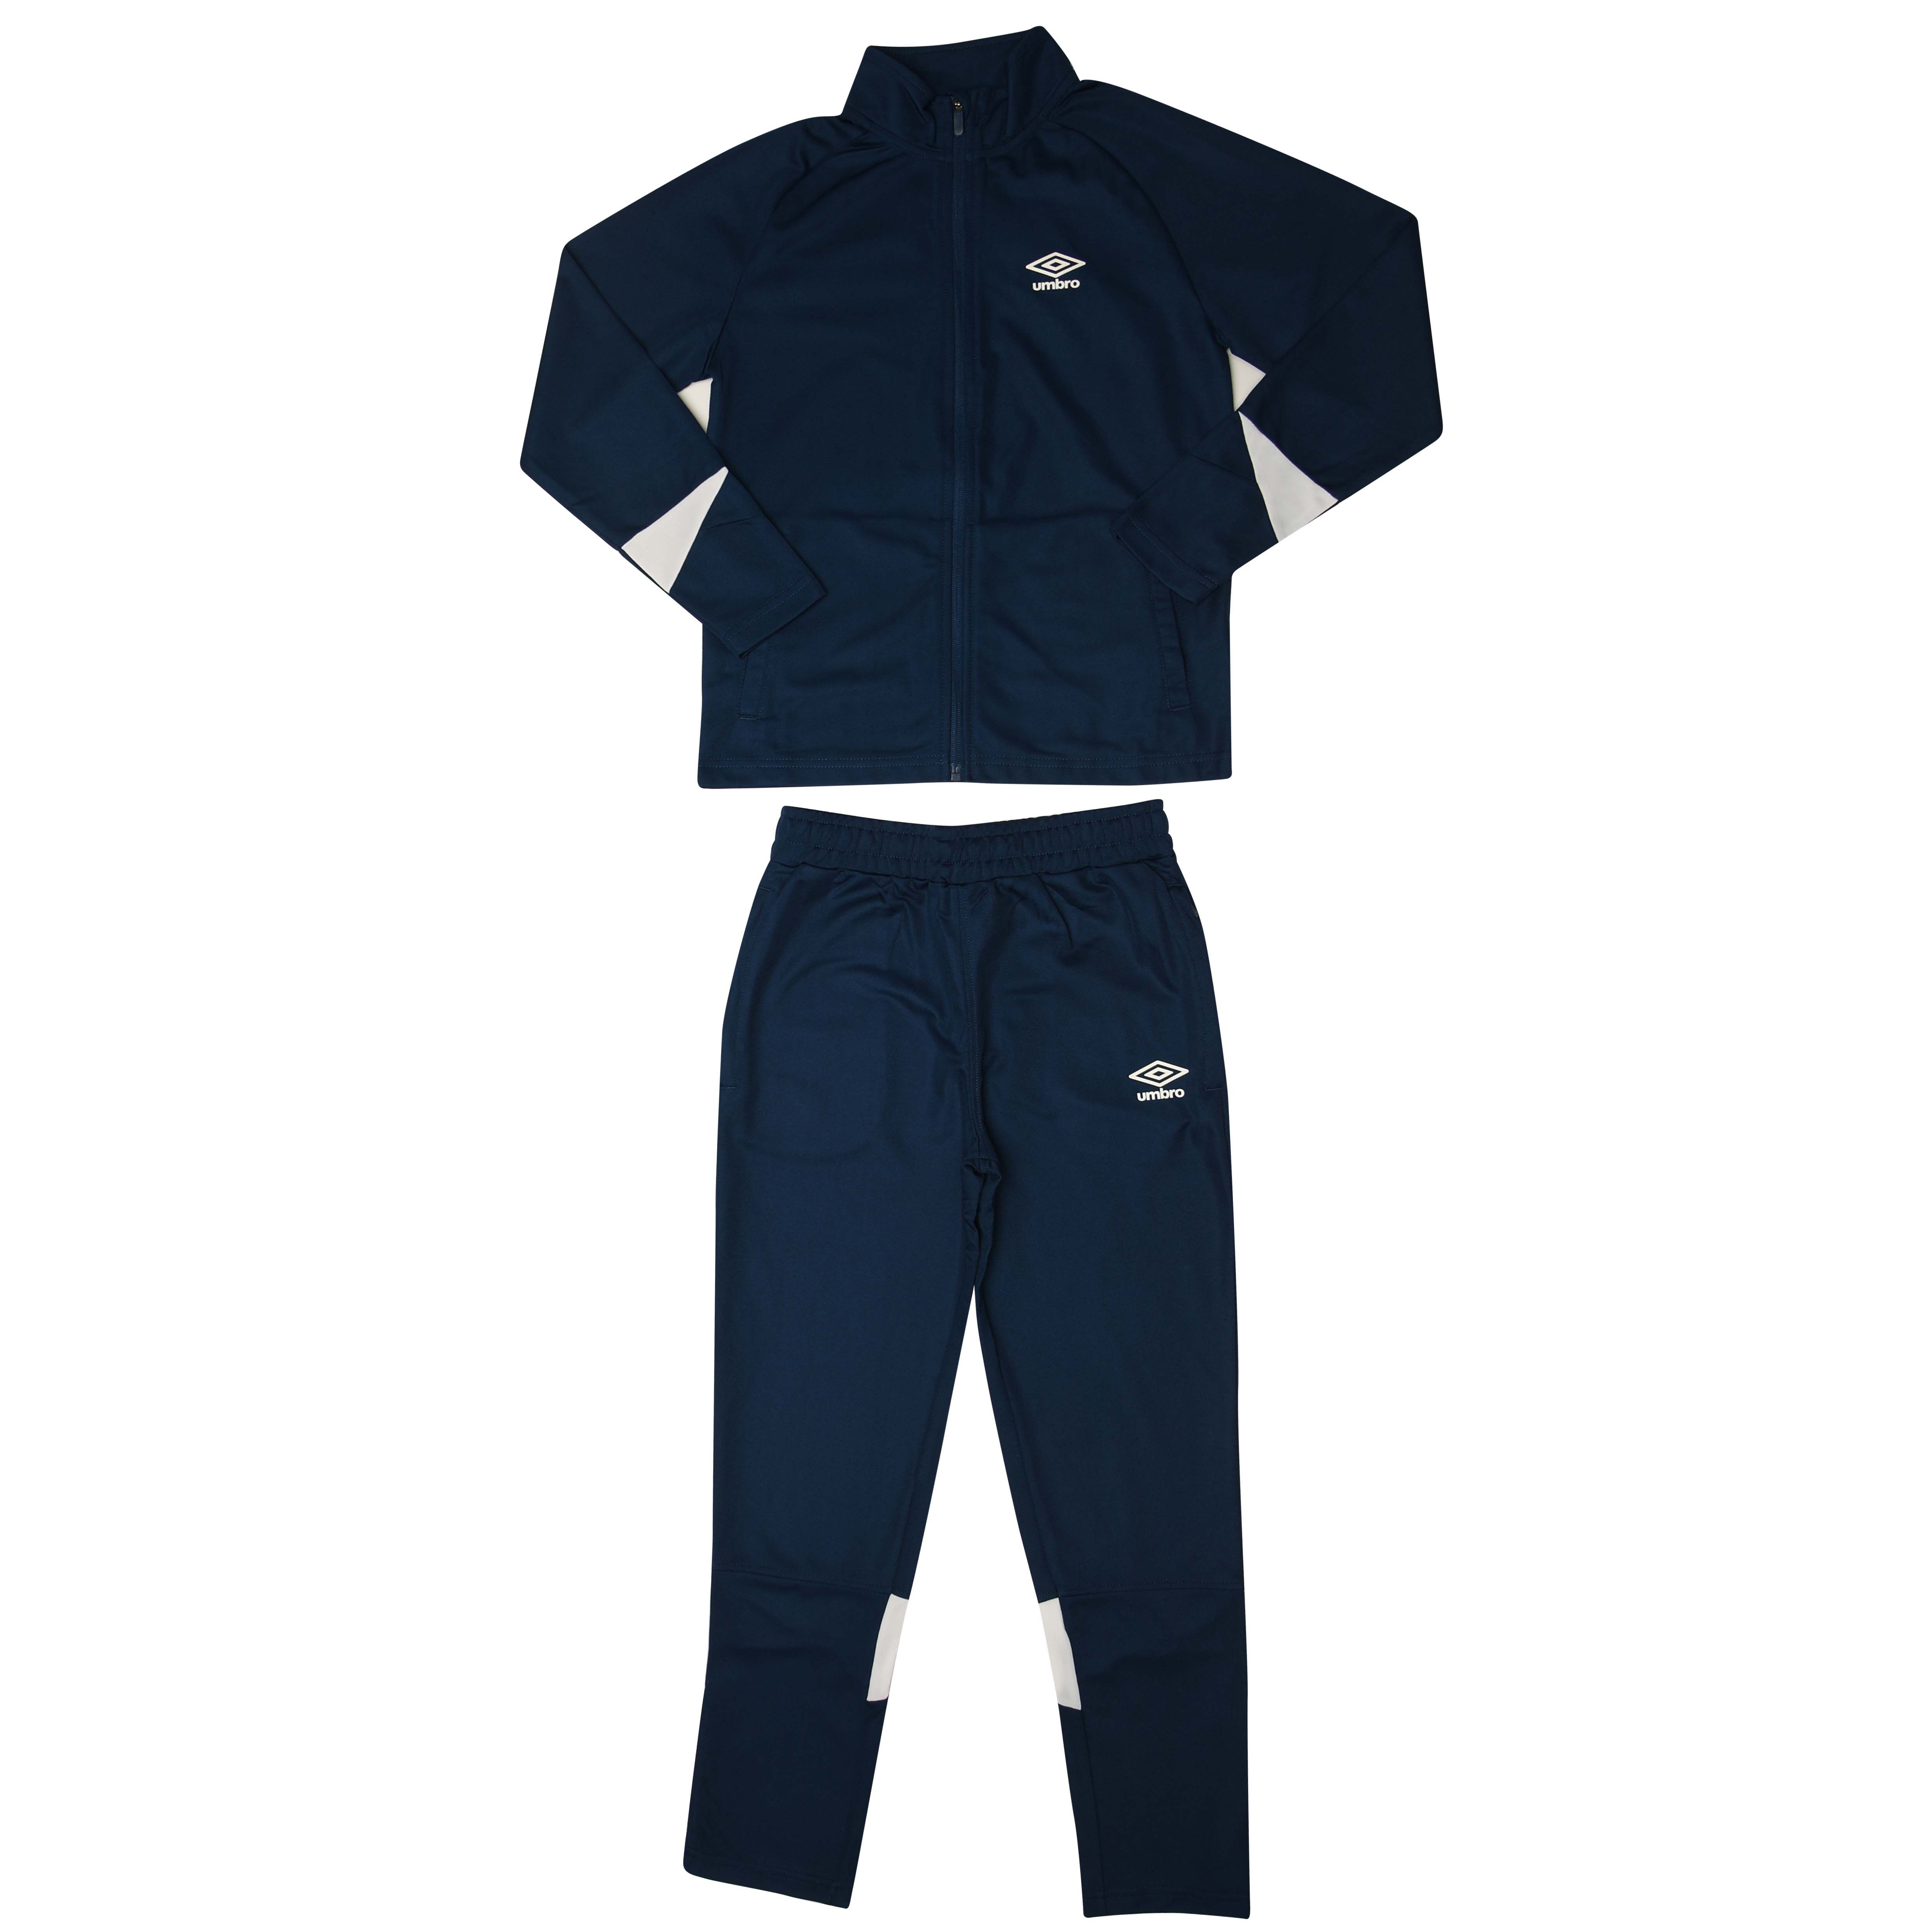 Boys Total Traning Tracksuit